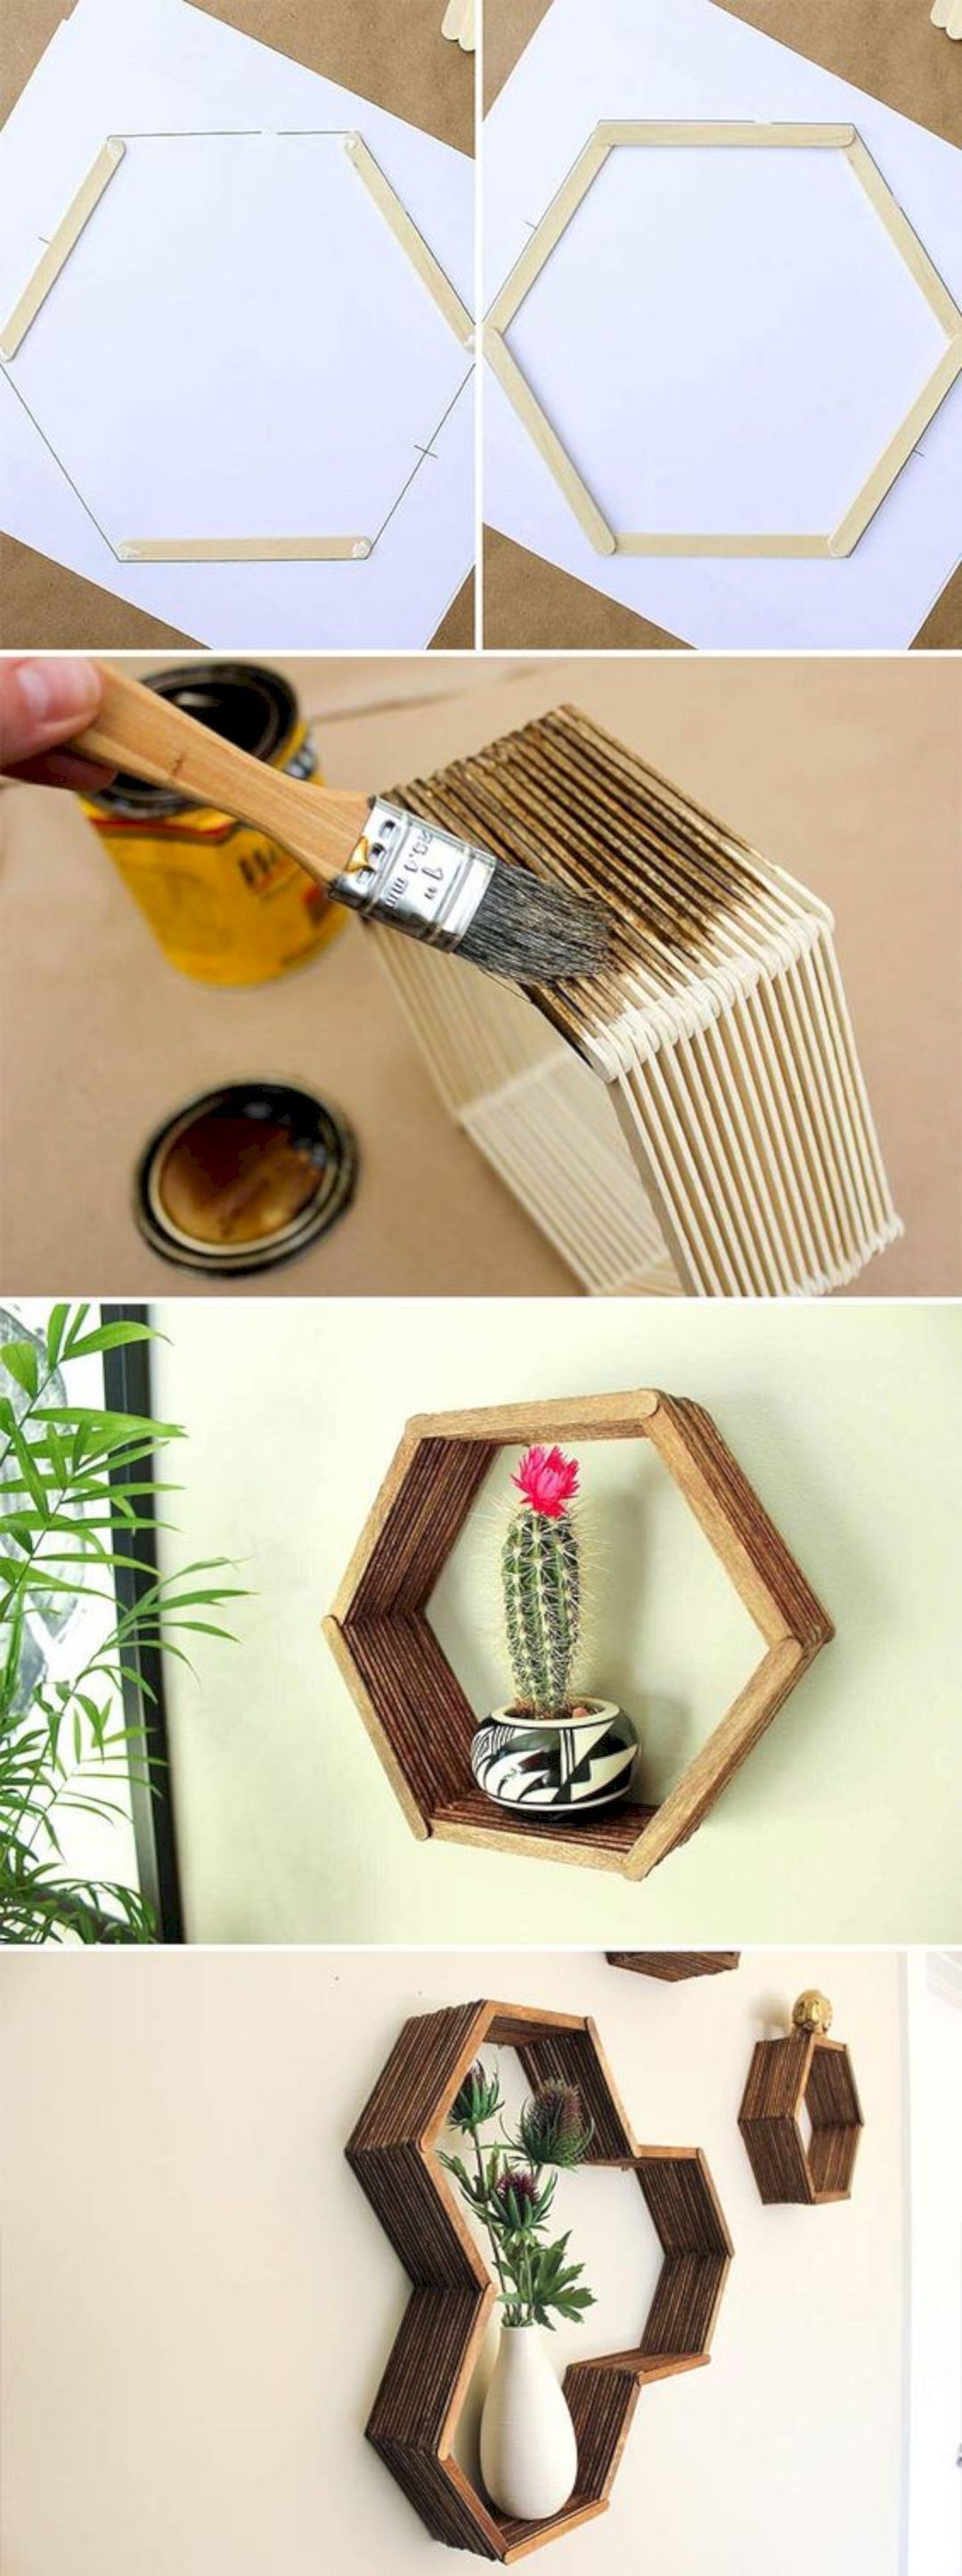 17 Coolest DIY Home Decor on A Budget https://www.futuristarchitecture.com/27733-diy-home-decor-on-a-budget.html